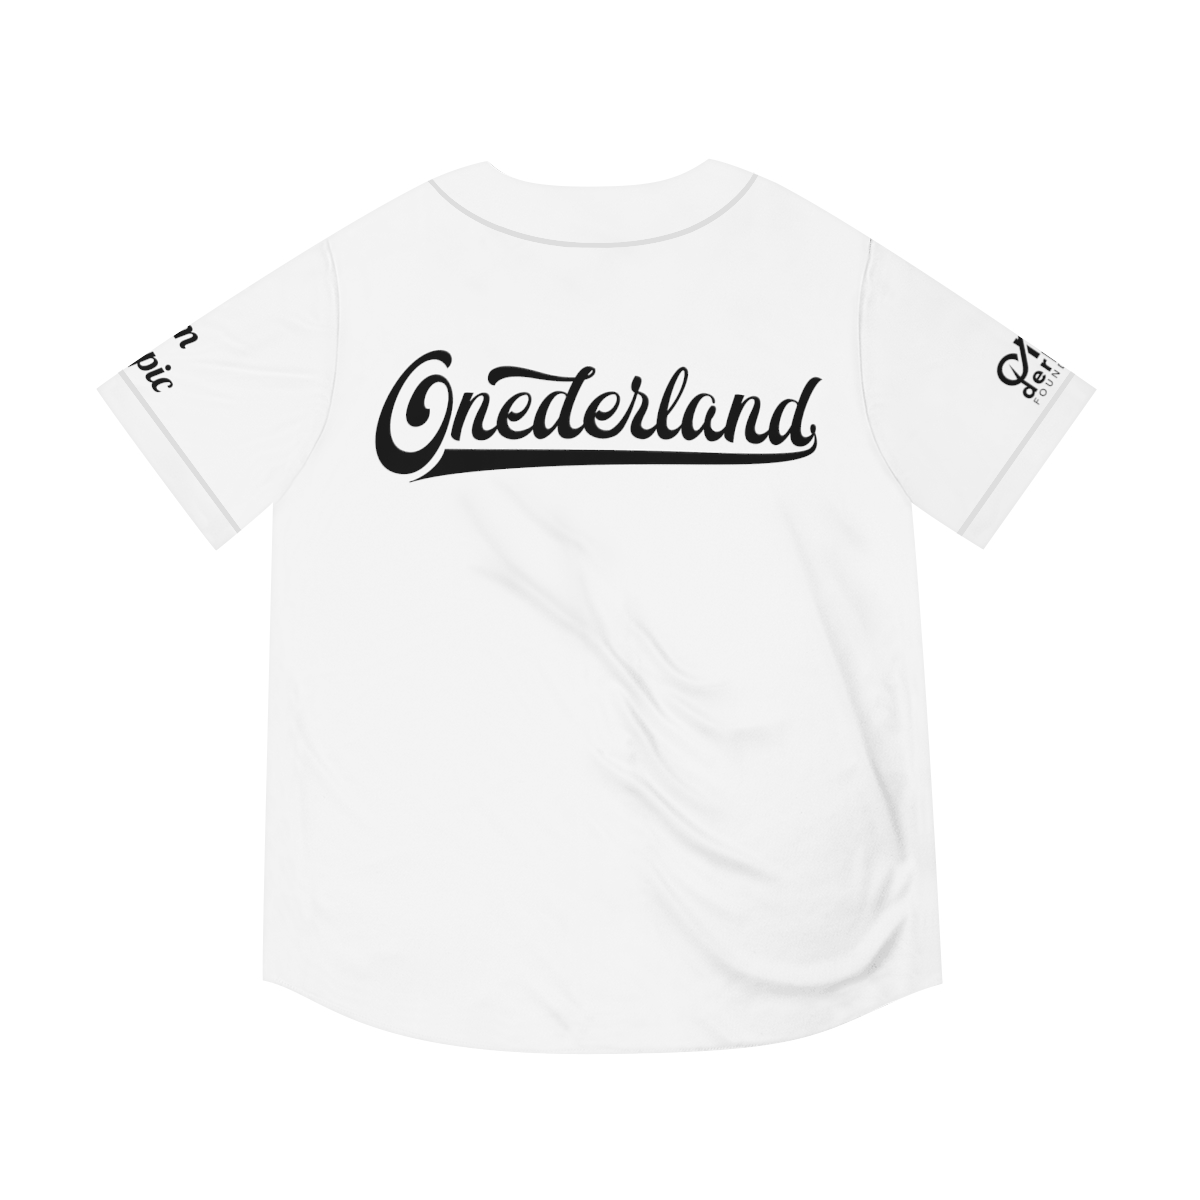 Team Ozempic ONEderland Baseball Jersey (AOP) product thumbnail image